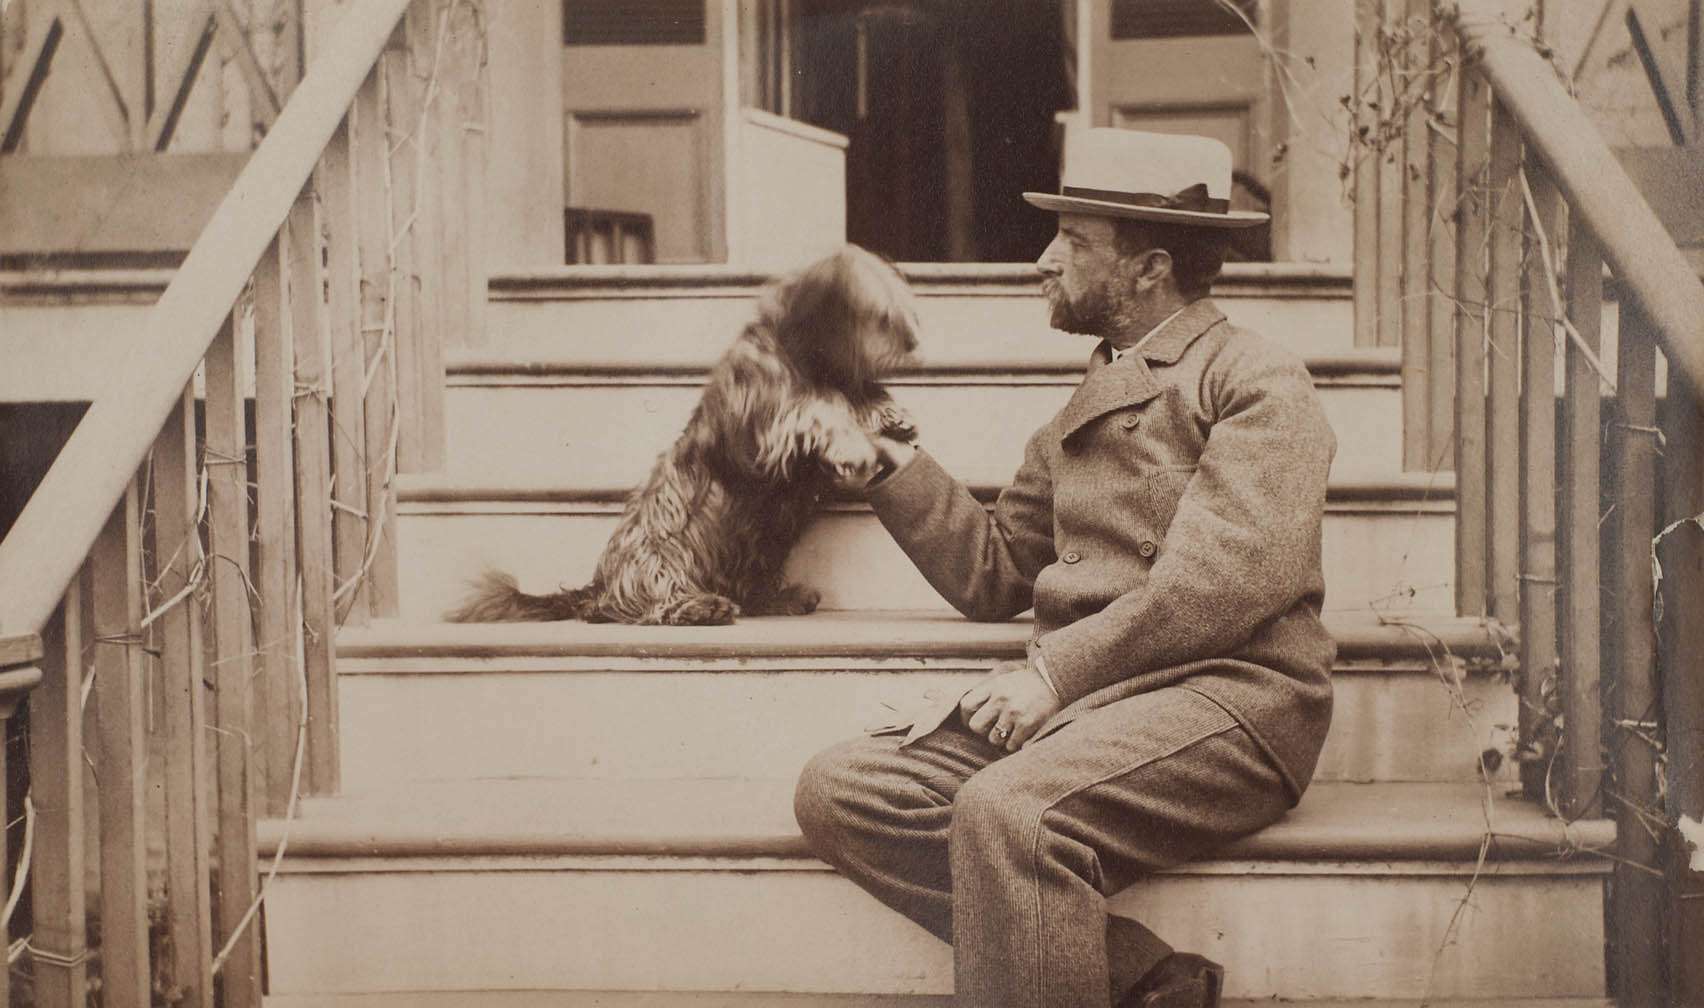 Henry Adams seated with dog on steps of piazza, c. 1883